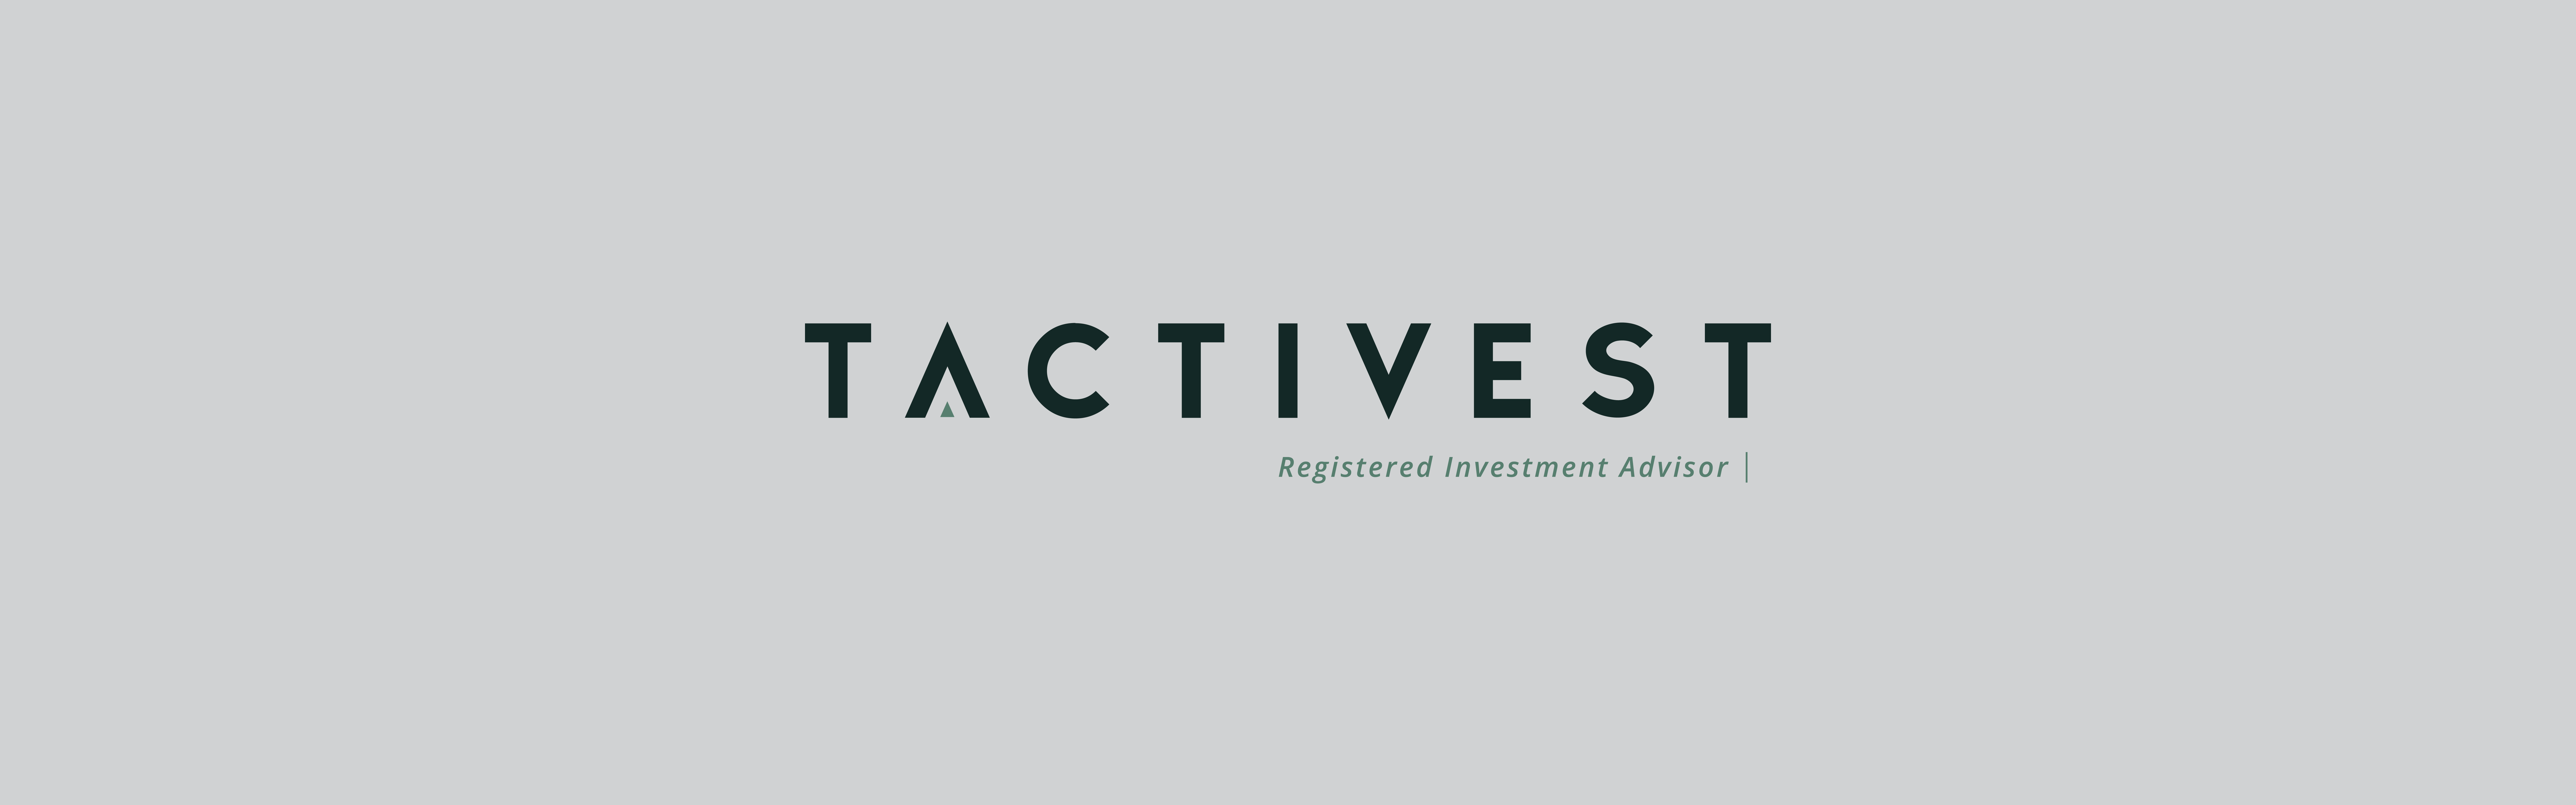 The image displays the word "TACTIVEST" in bold, capital letters, centered on a light grey background, with the phrase "registered investment advisor" underneath in smaller lettering.